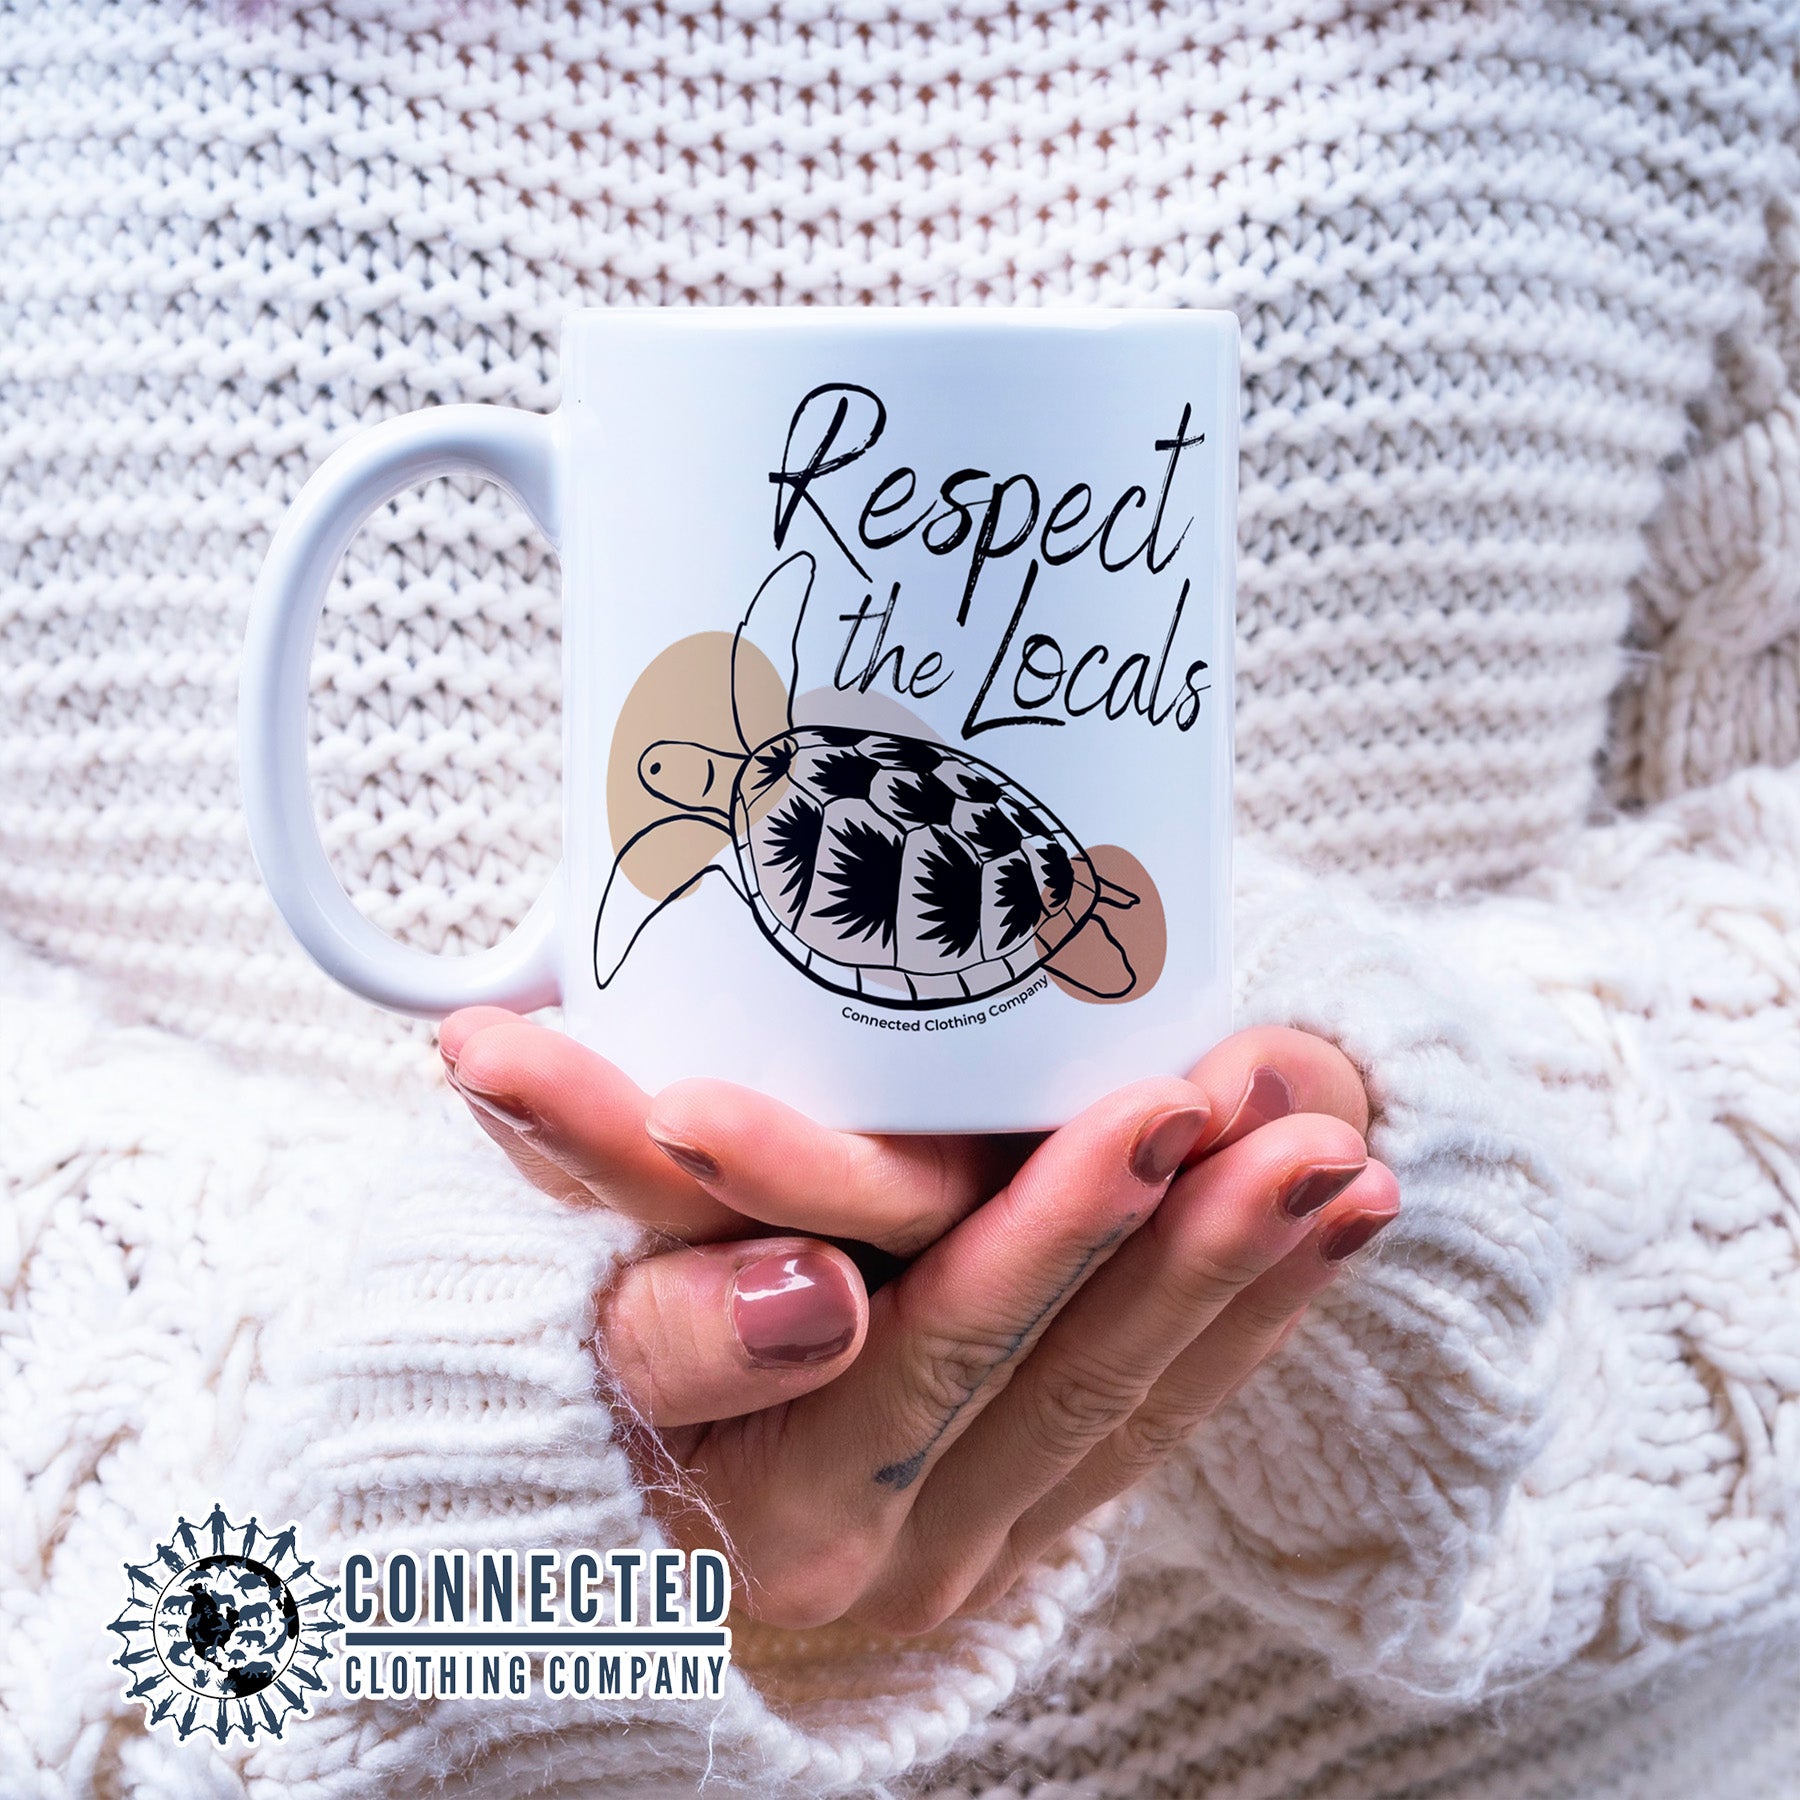 Respect The Locals Sea Turtle Mug - sweetsherriloudesigns - 10% donated to sea turtle conservation